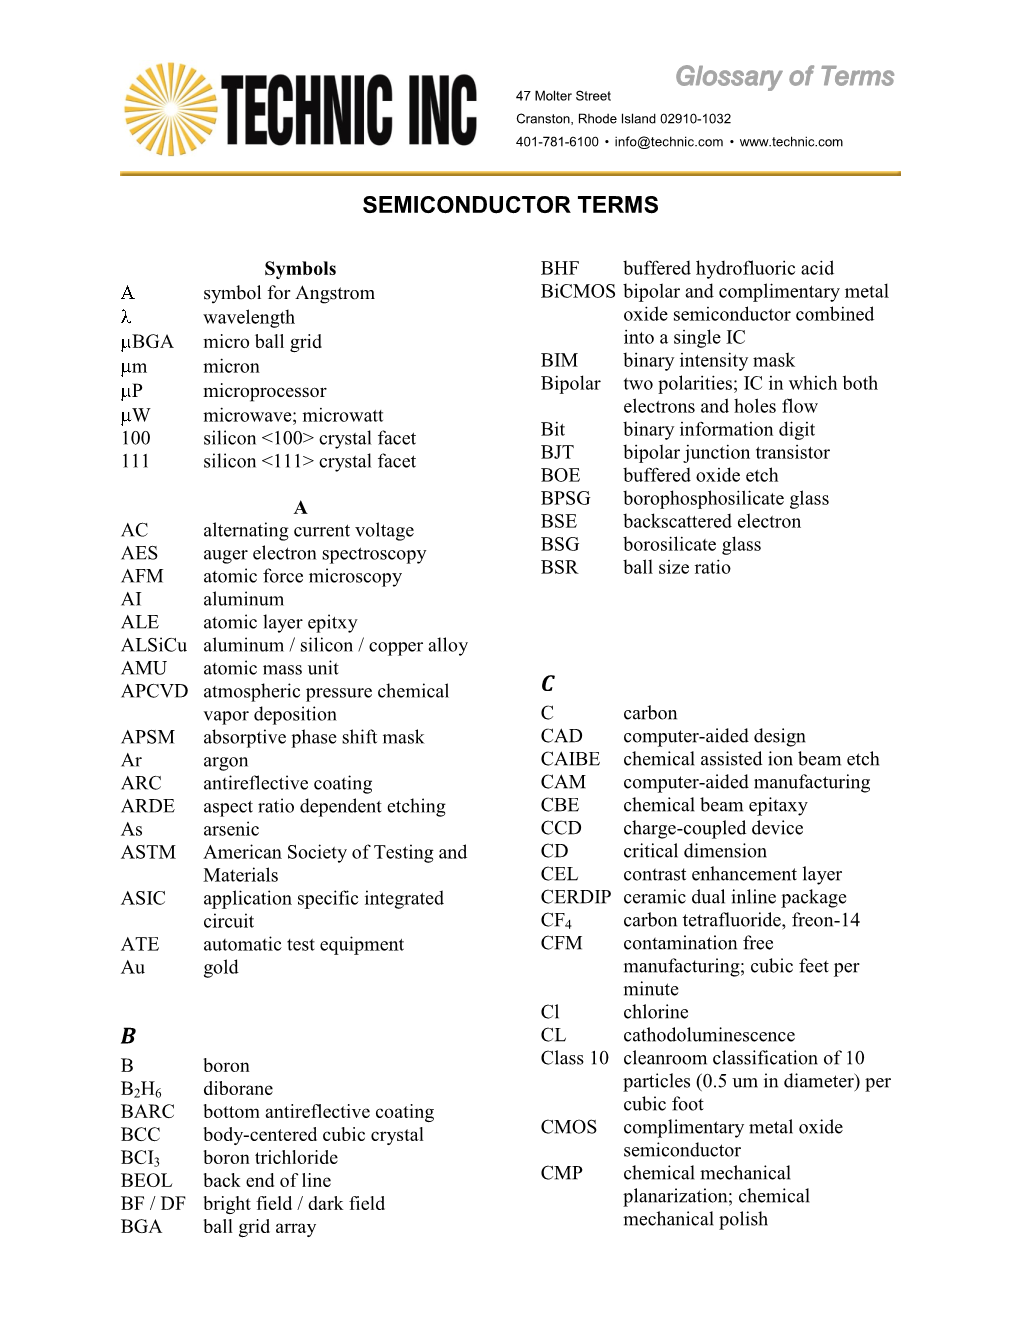 Semiconductor Terms